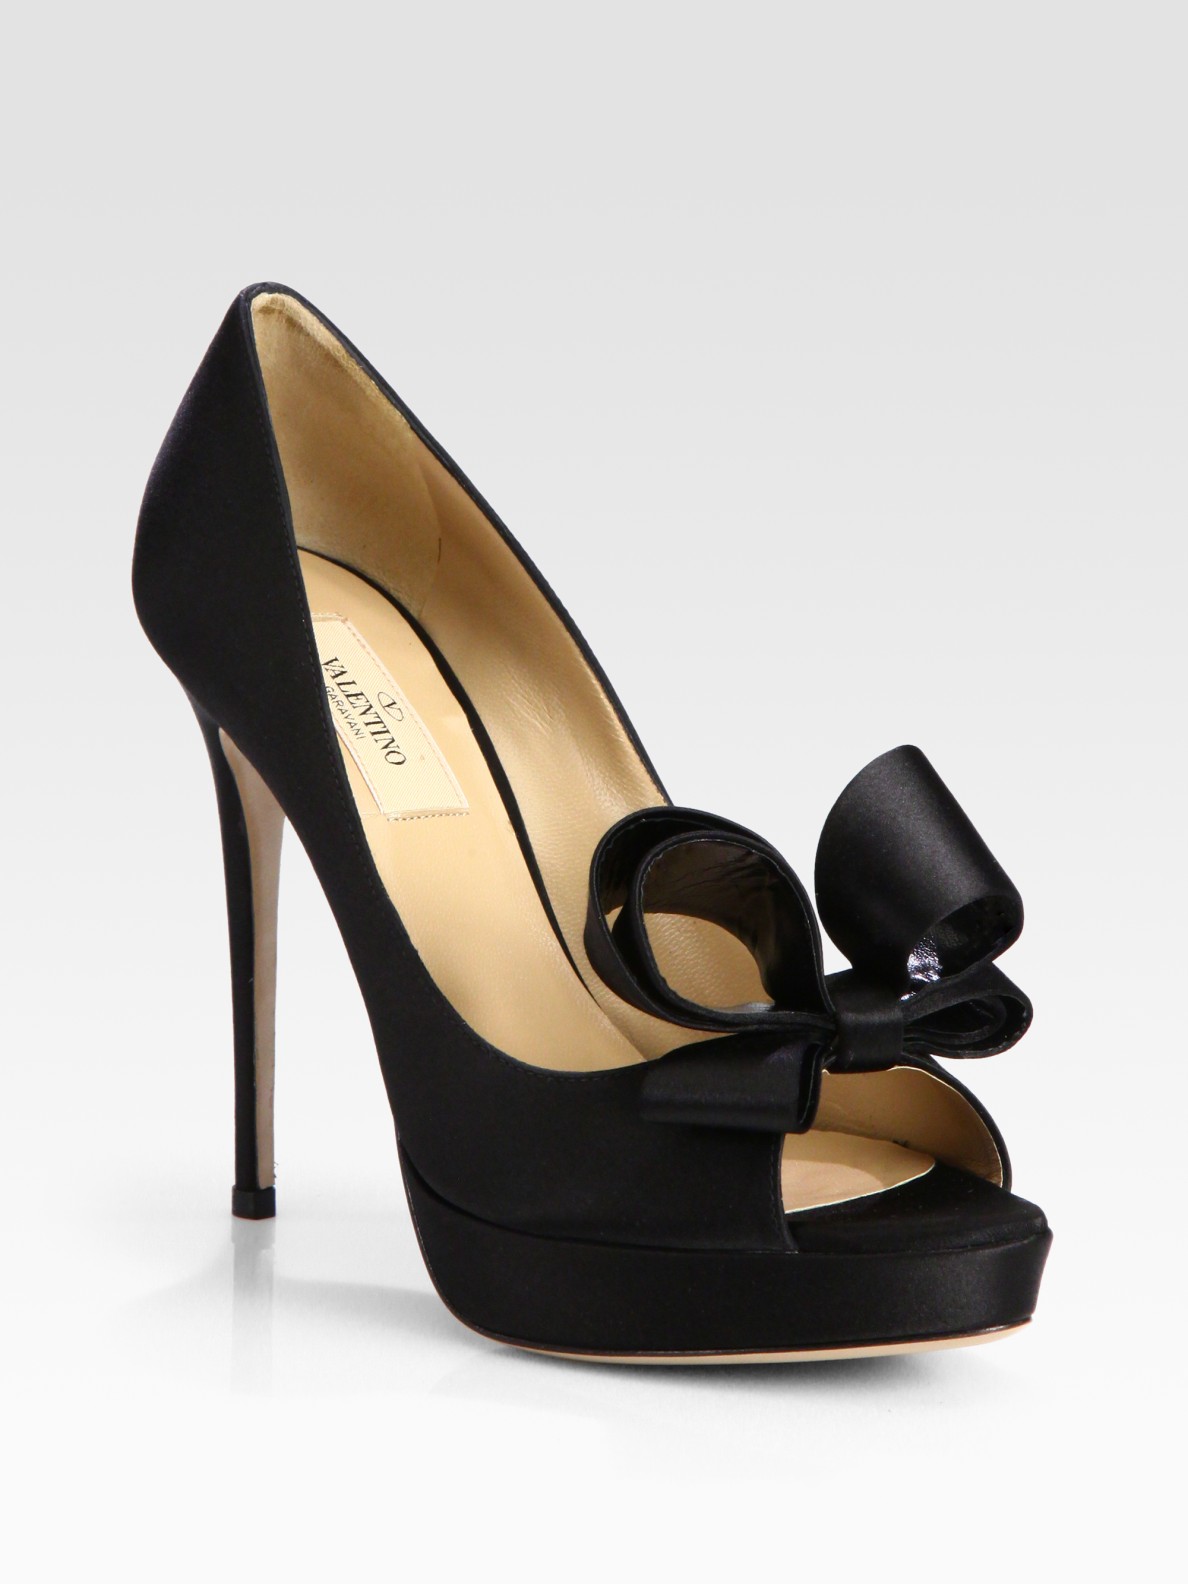 valentino pumps with bow